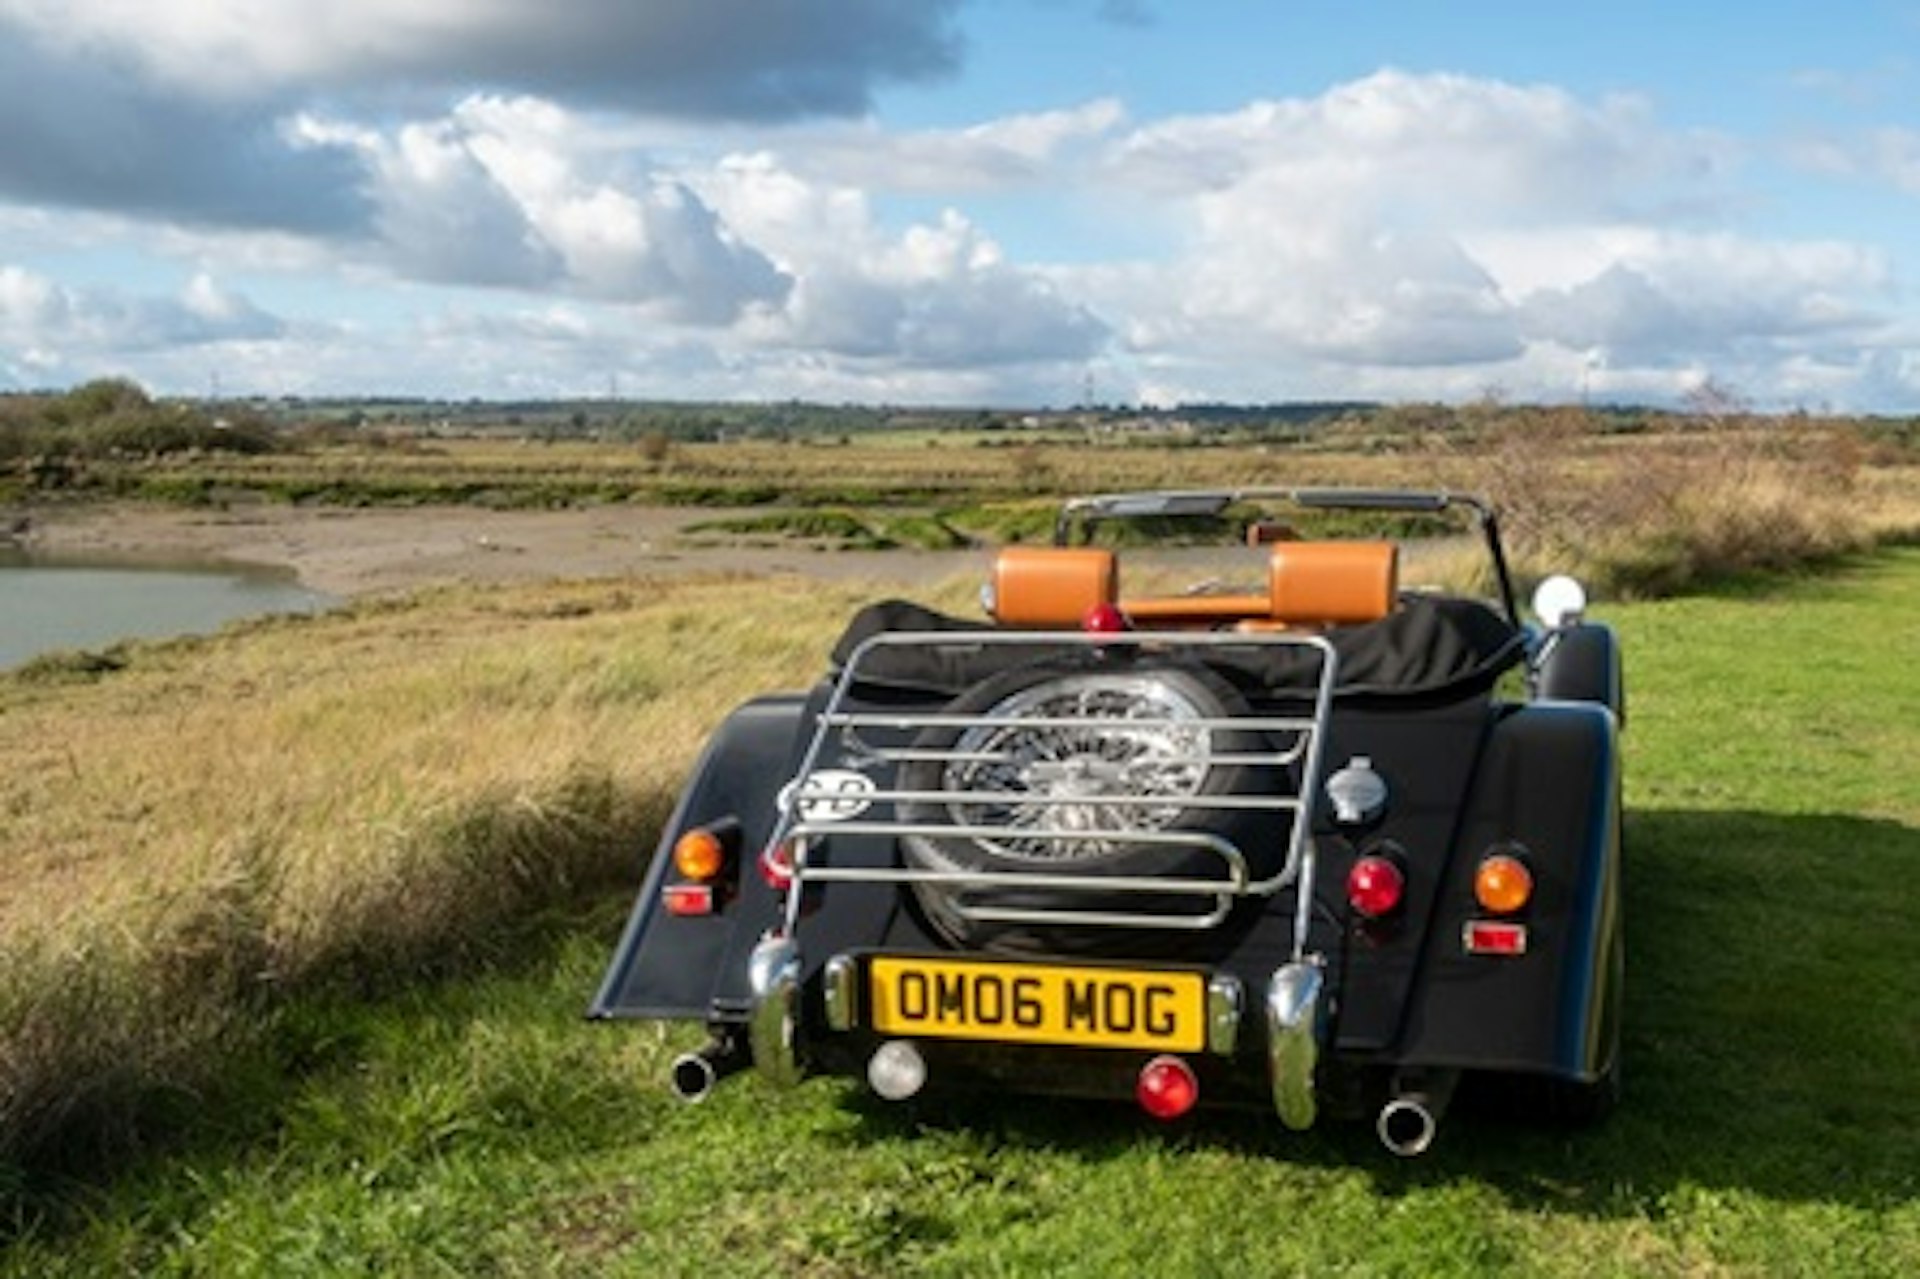 Morgan Roadster V6 Classic Car On Road Driving Experience - Weekday 2